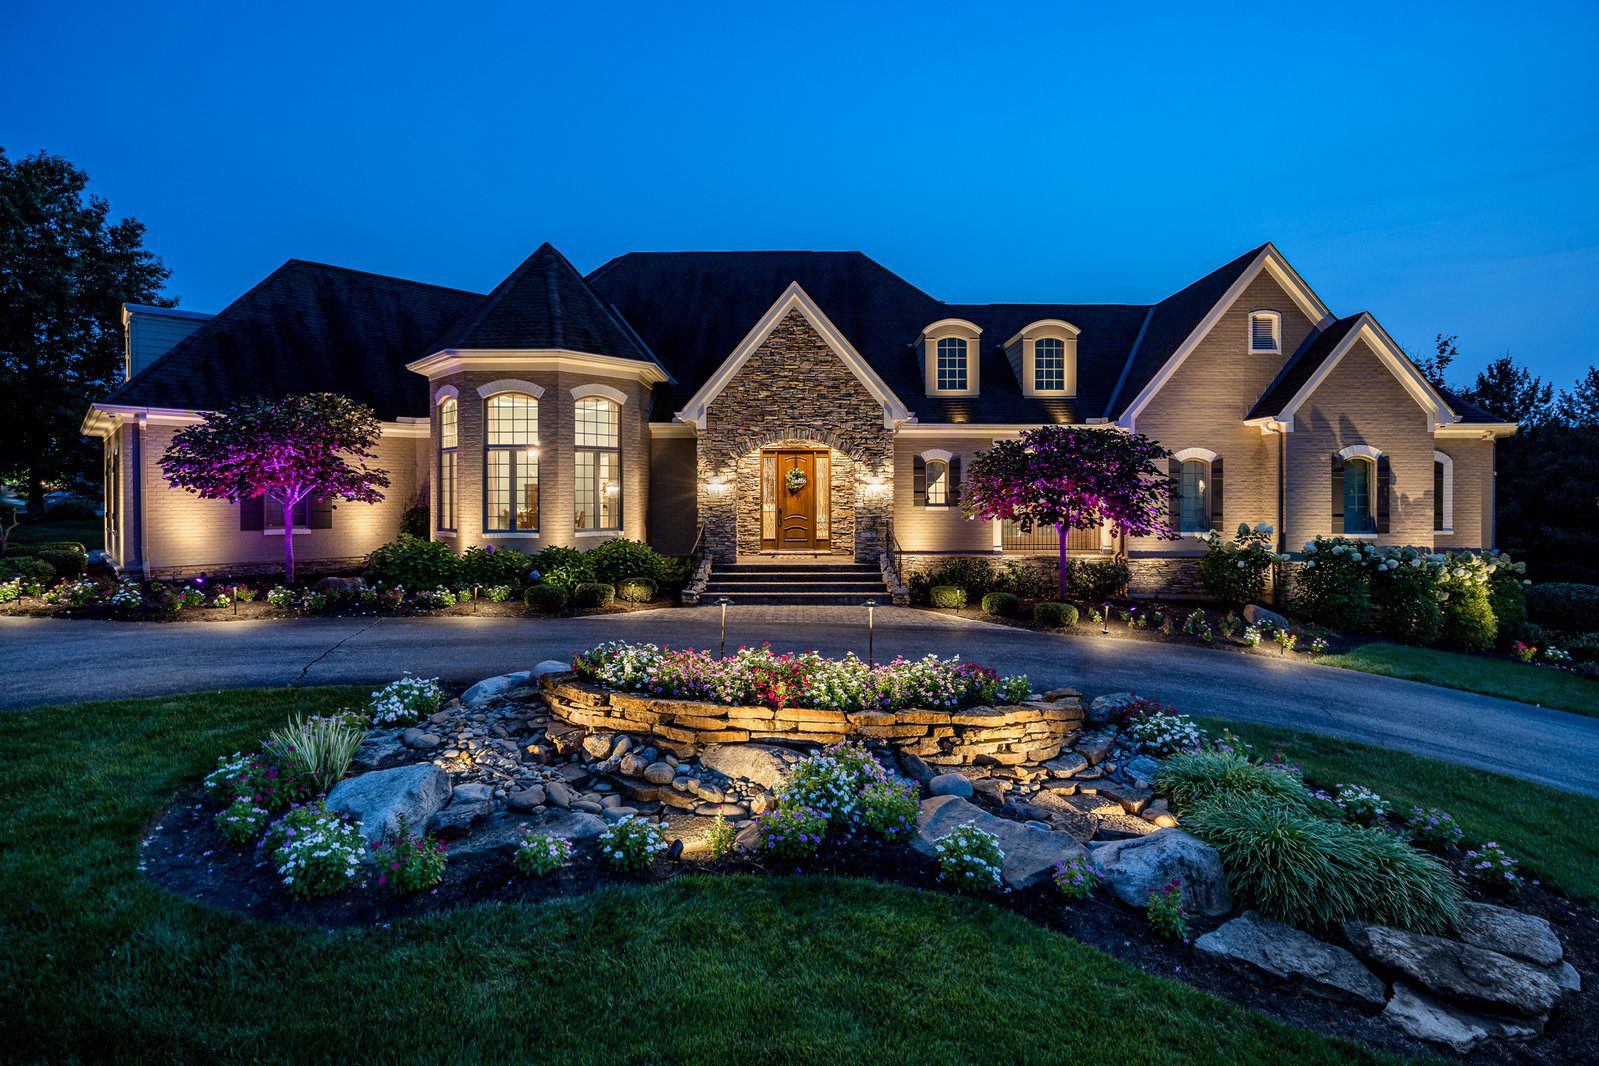 A large house with lights on the front yard.